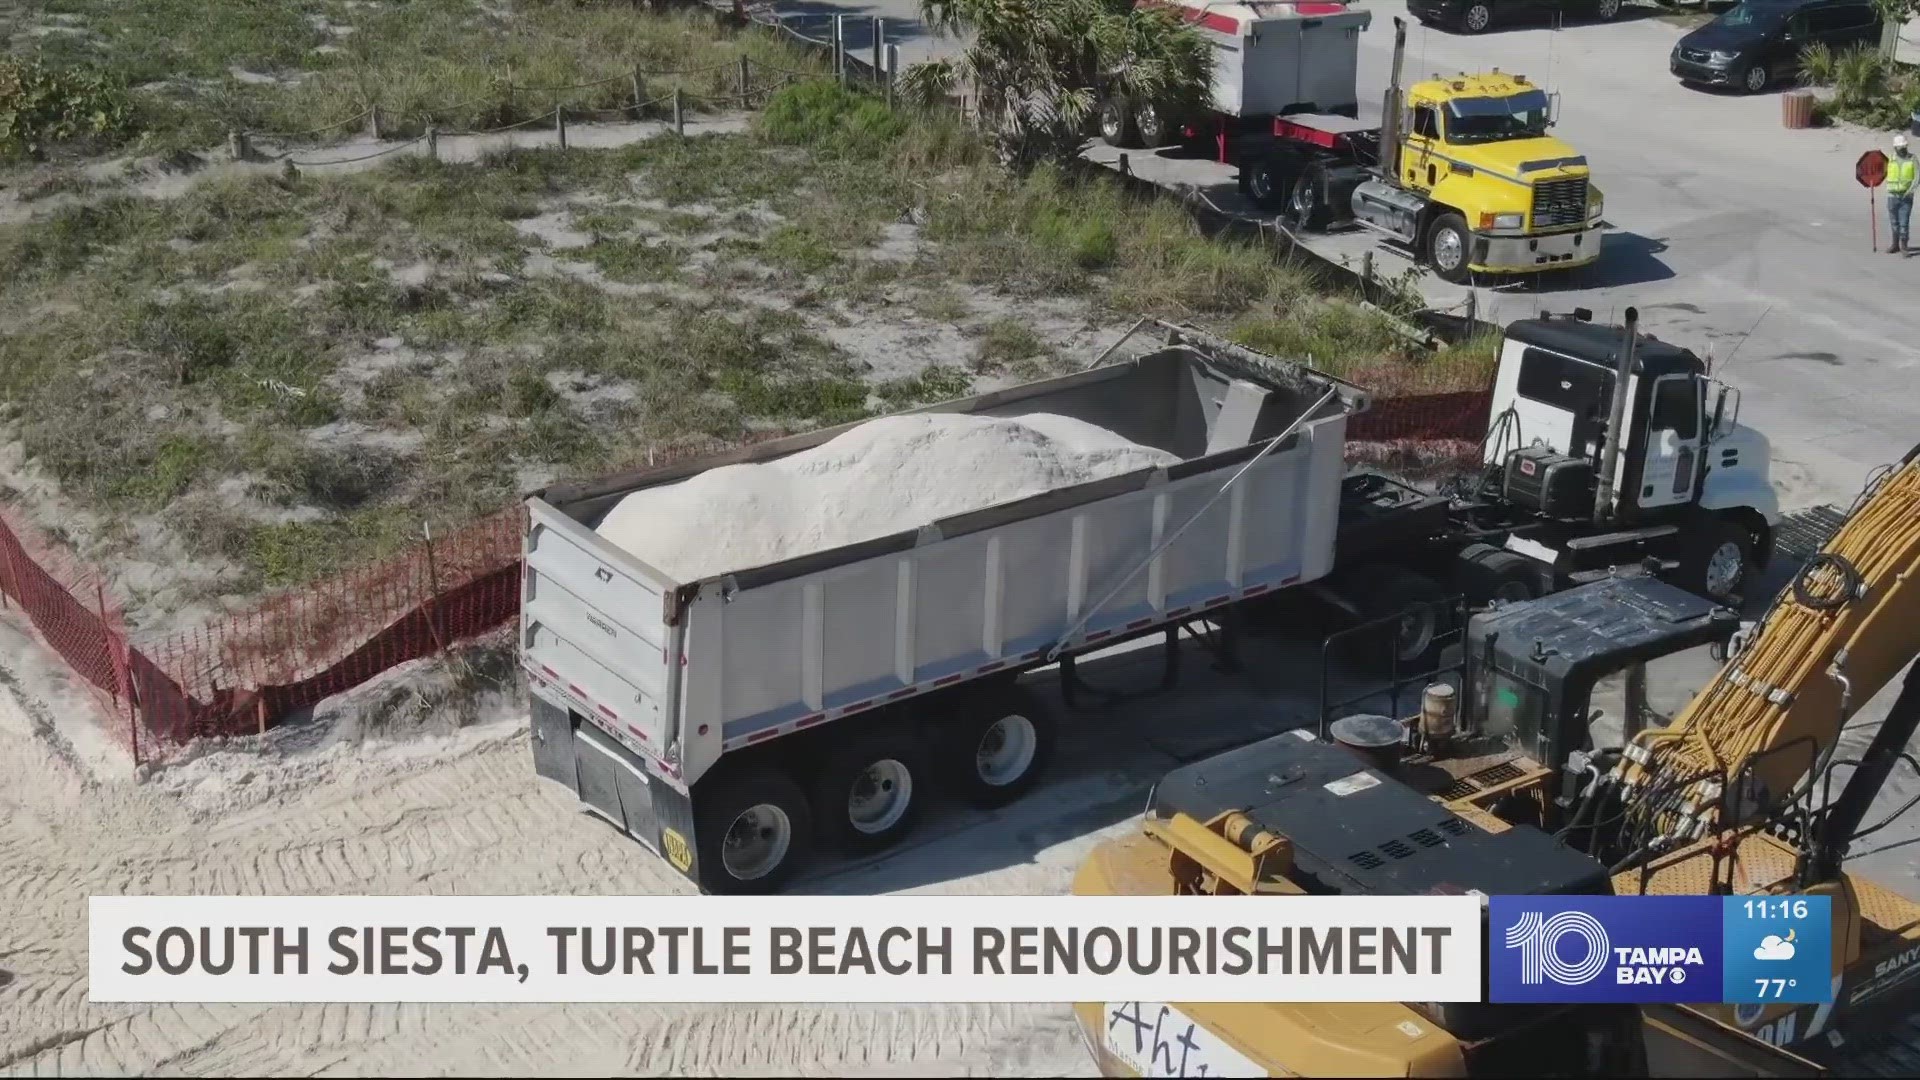 The project is working to fill in approximately 92,000 cubic yards of beach-compatible sand, a news release says.